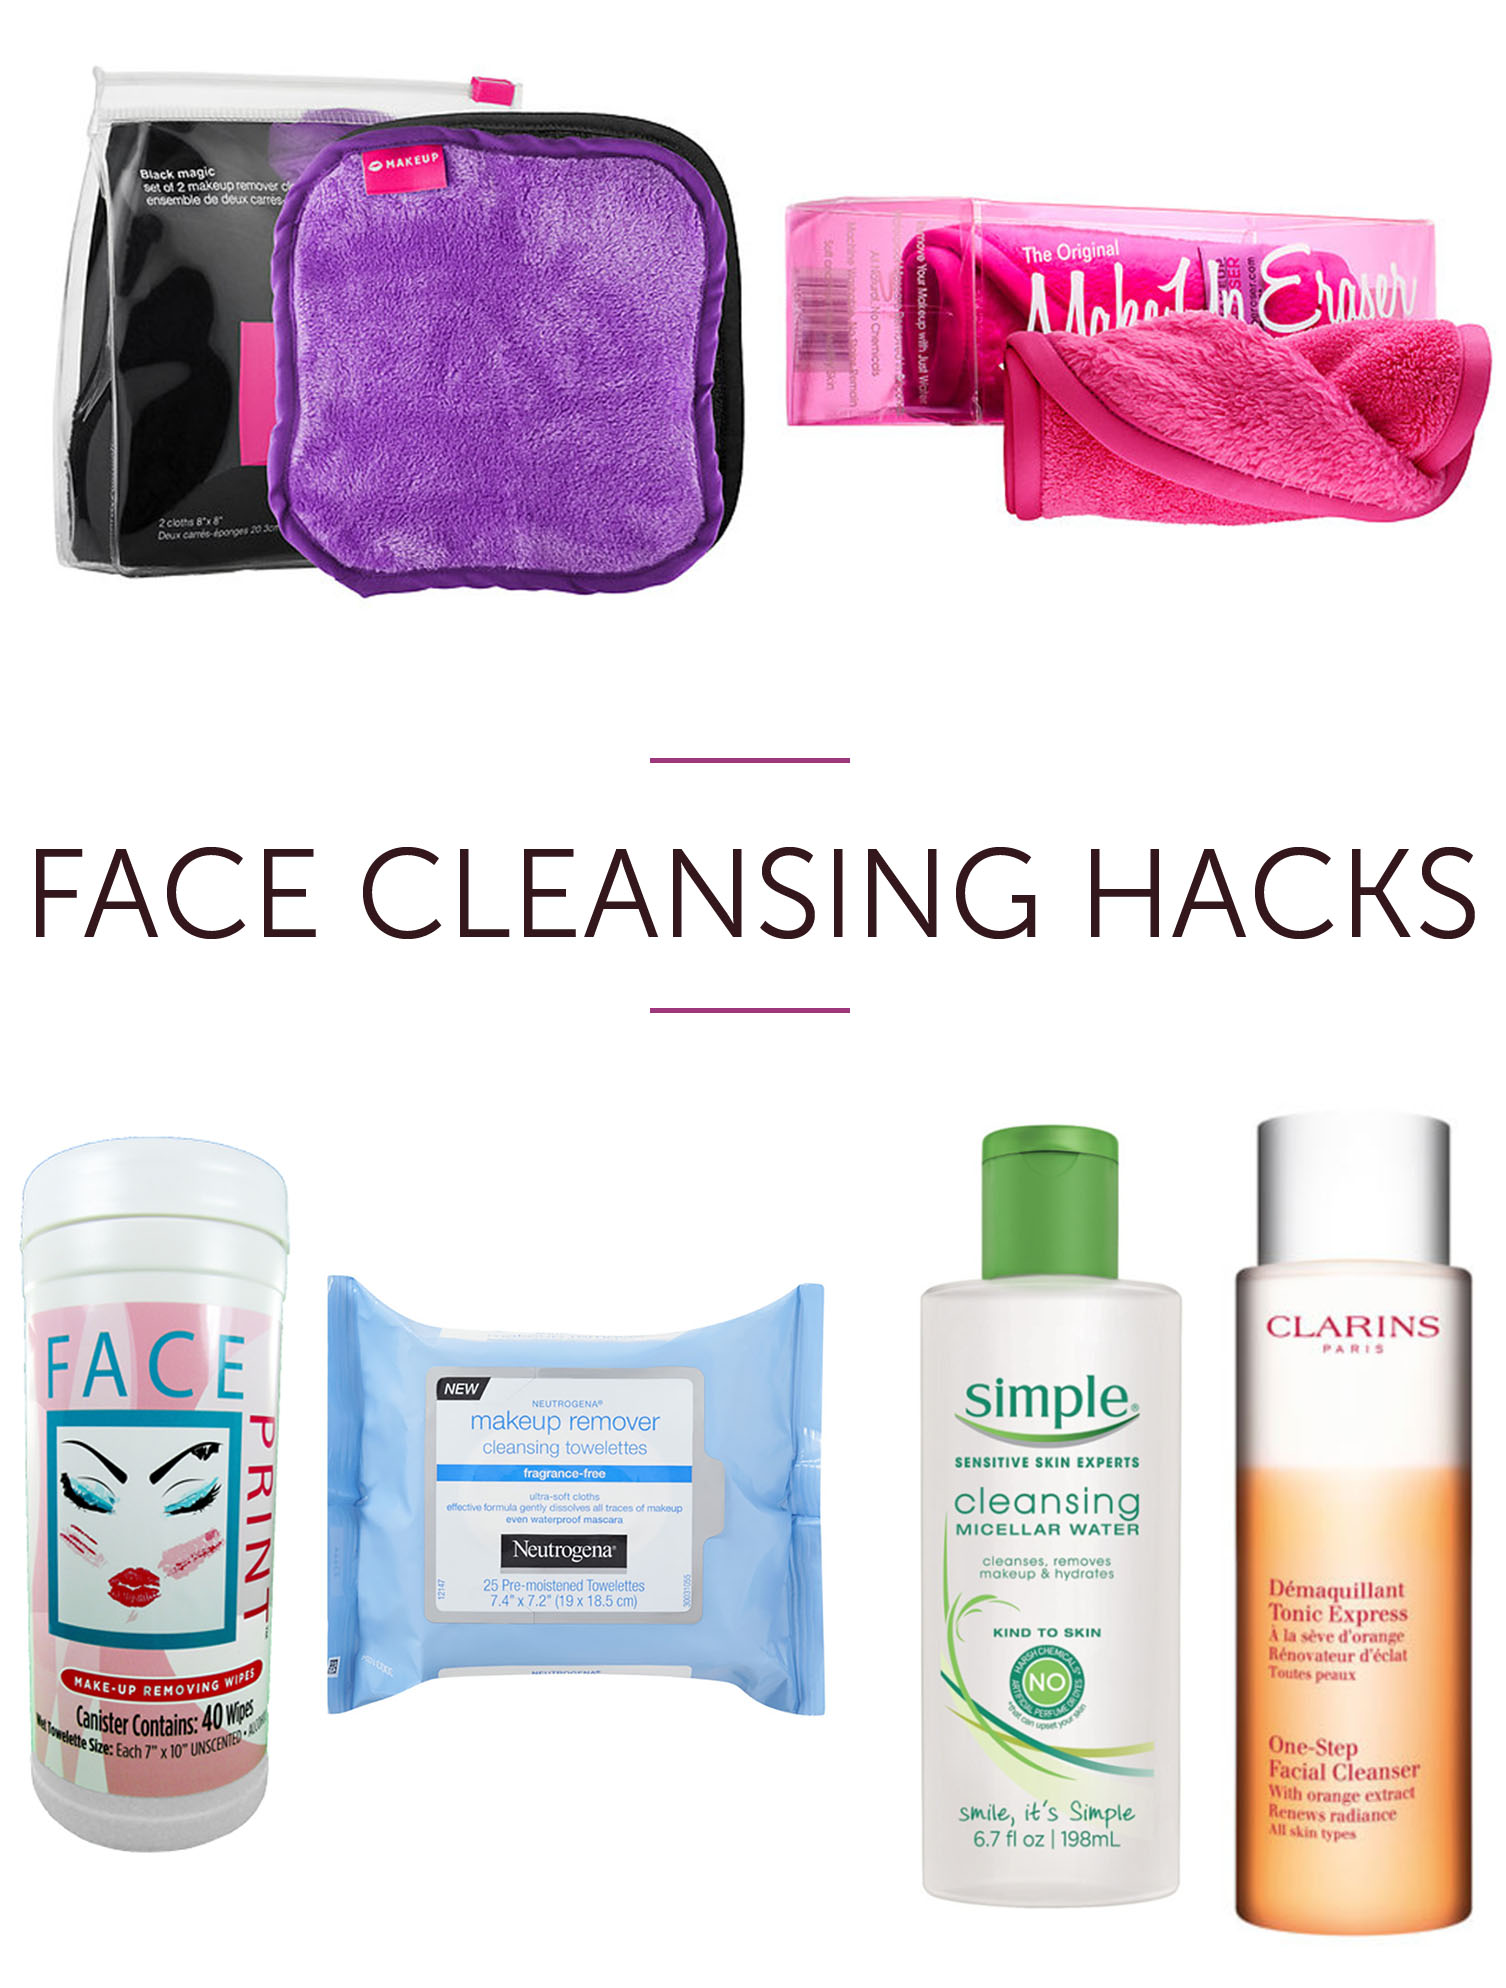 FACE CLEANSING HACKS FOR YOUR INNER LAZY GAL